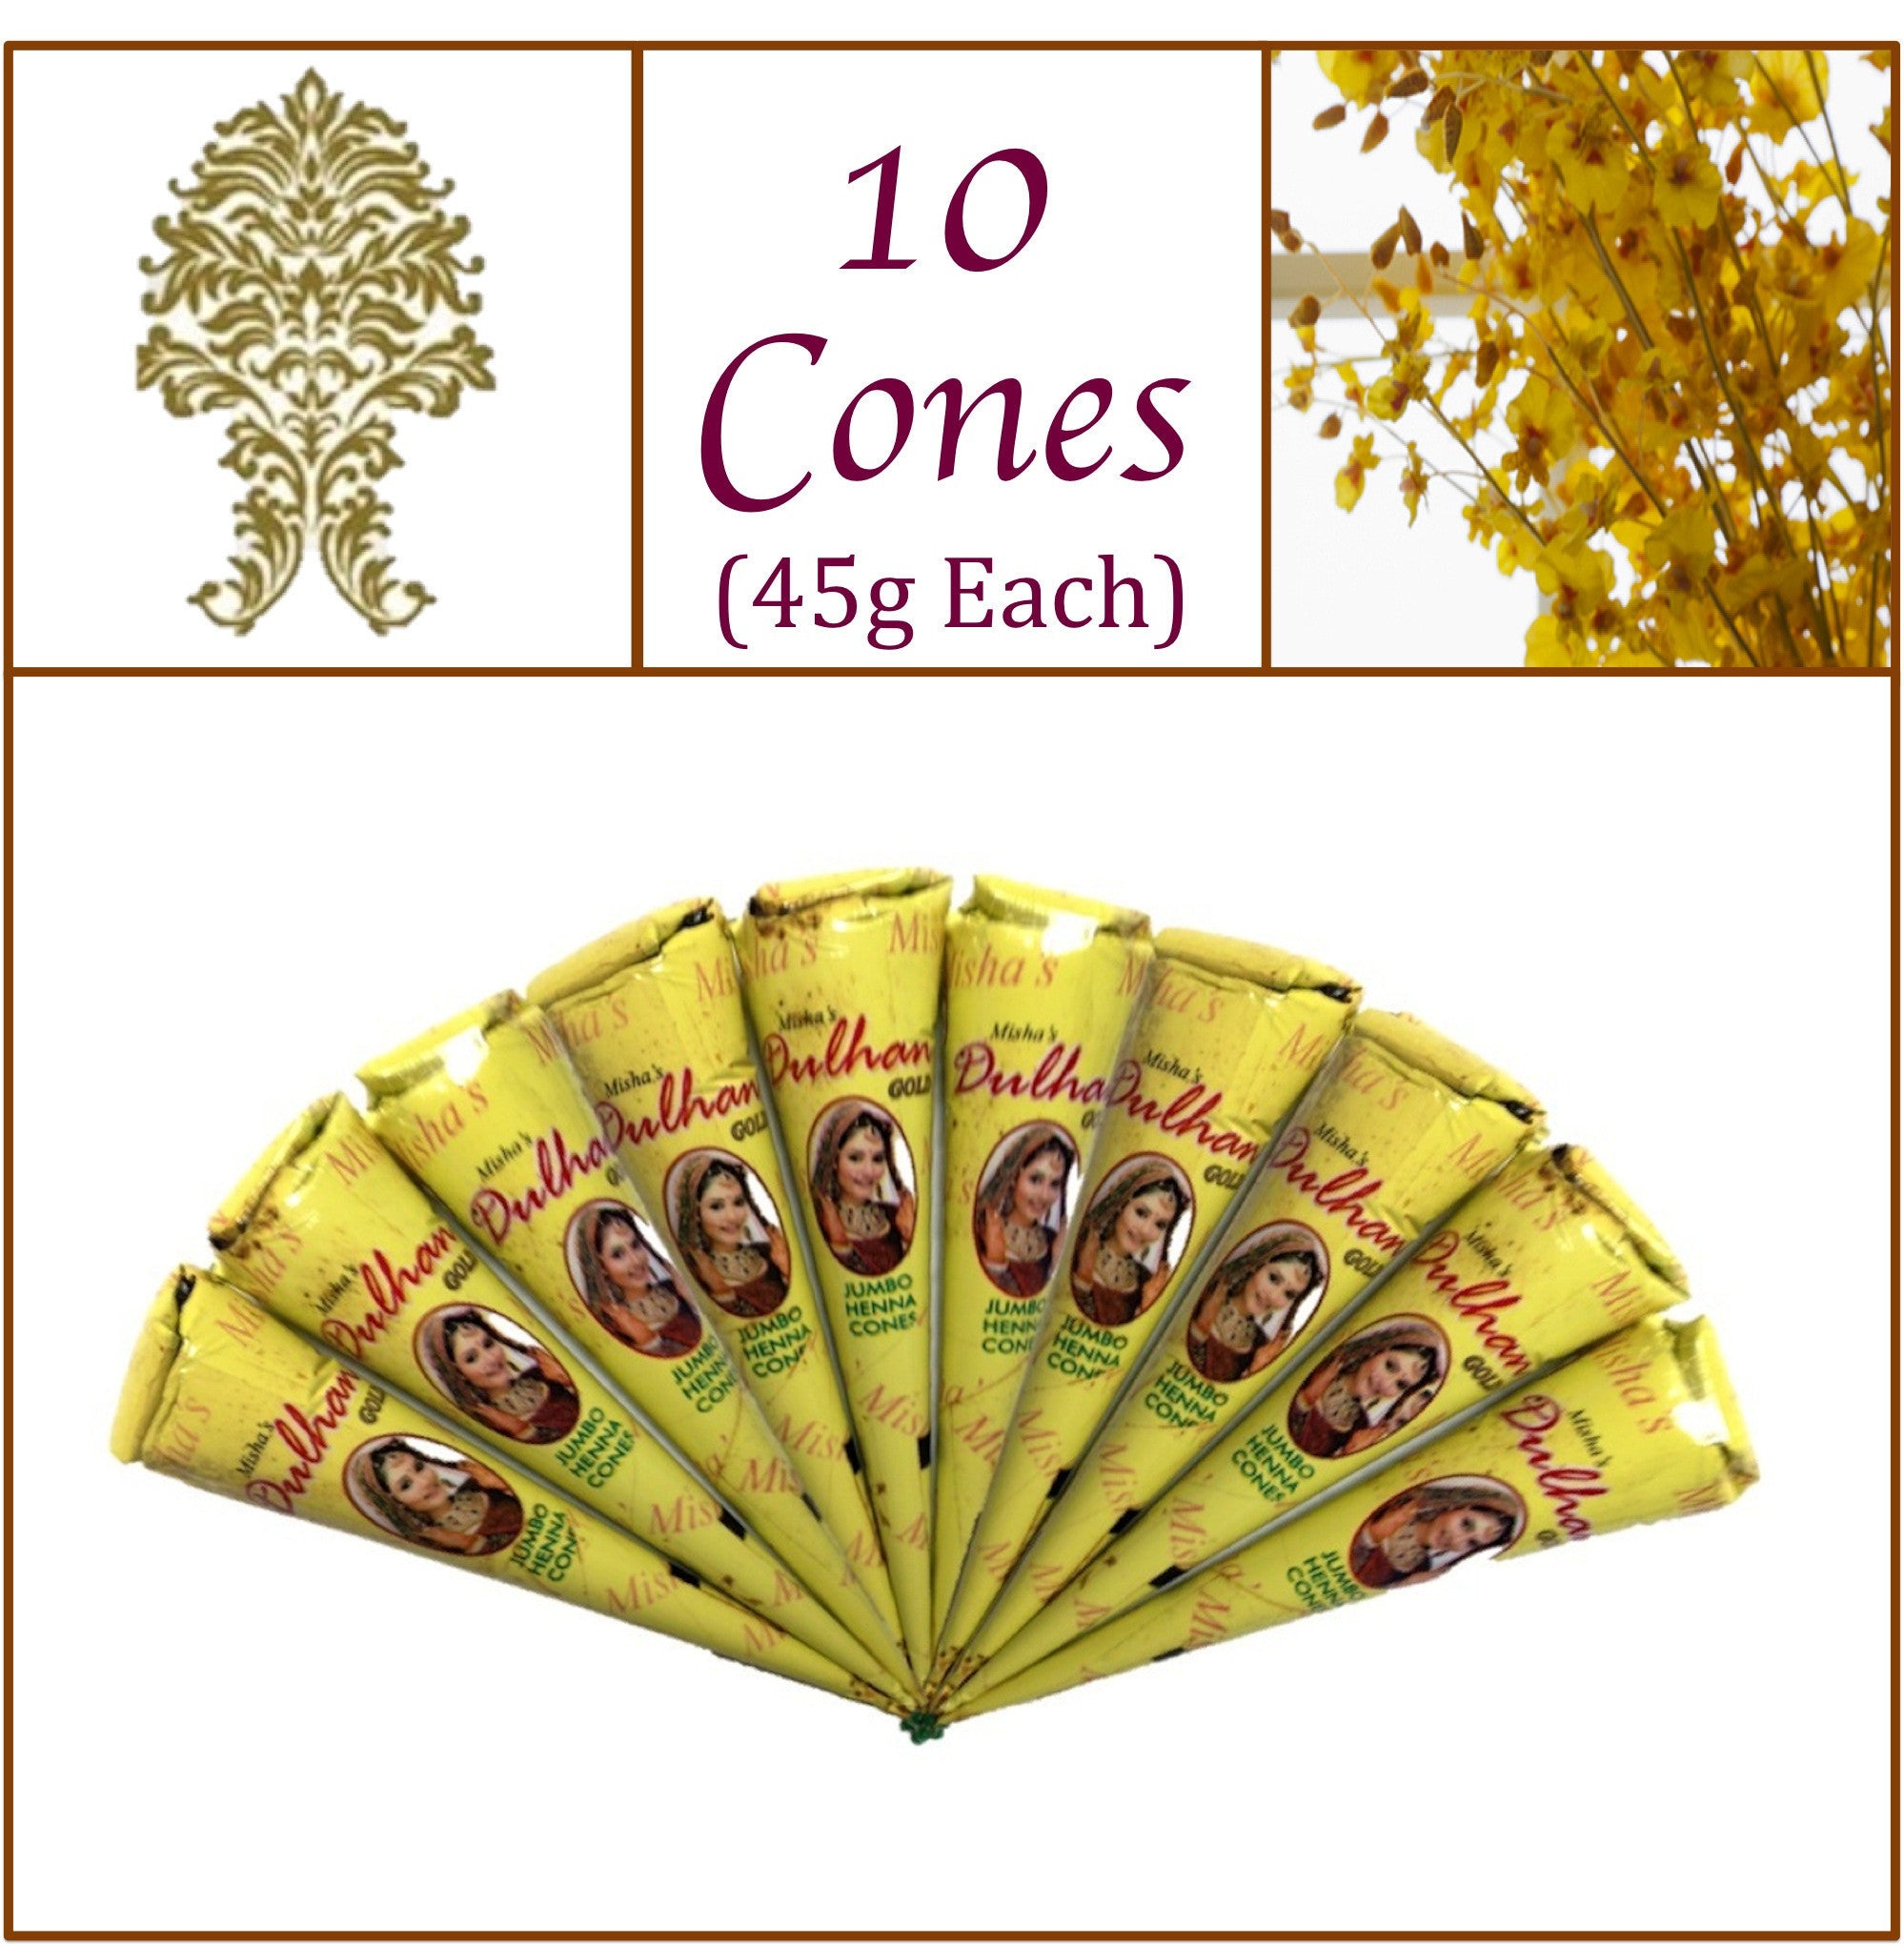 10 Jumbo Cones. Dulhan Gold Henna Paste. No Chemicals No PPD. 45g Ea.